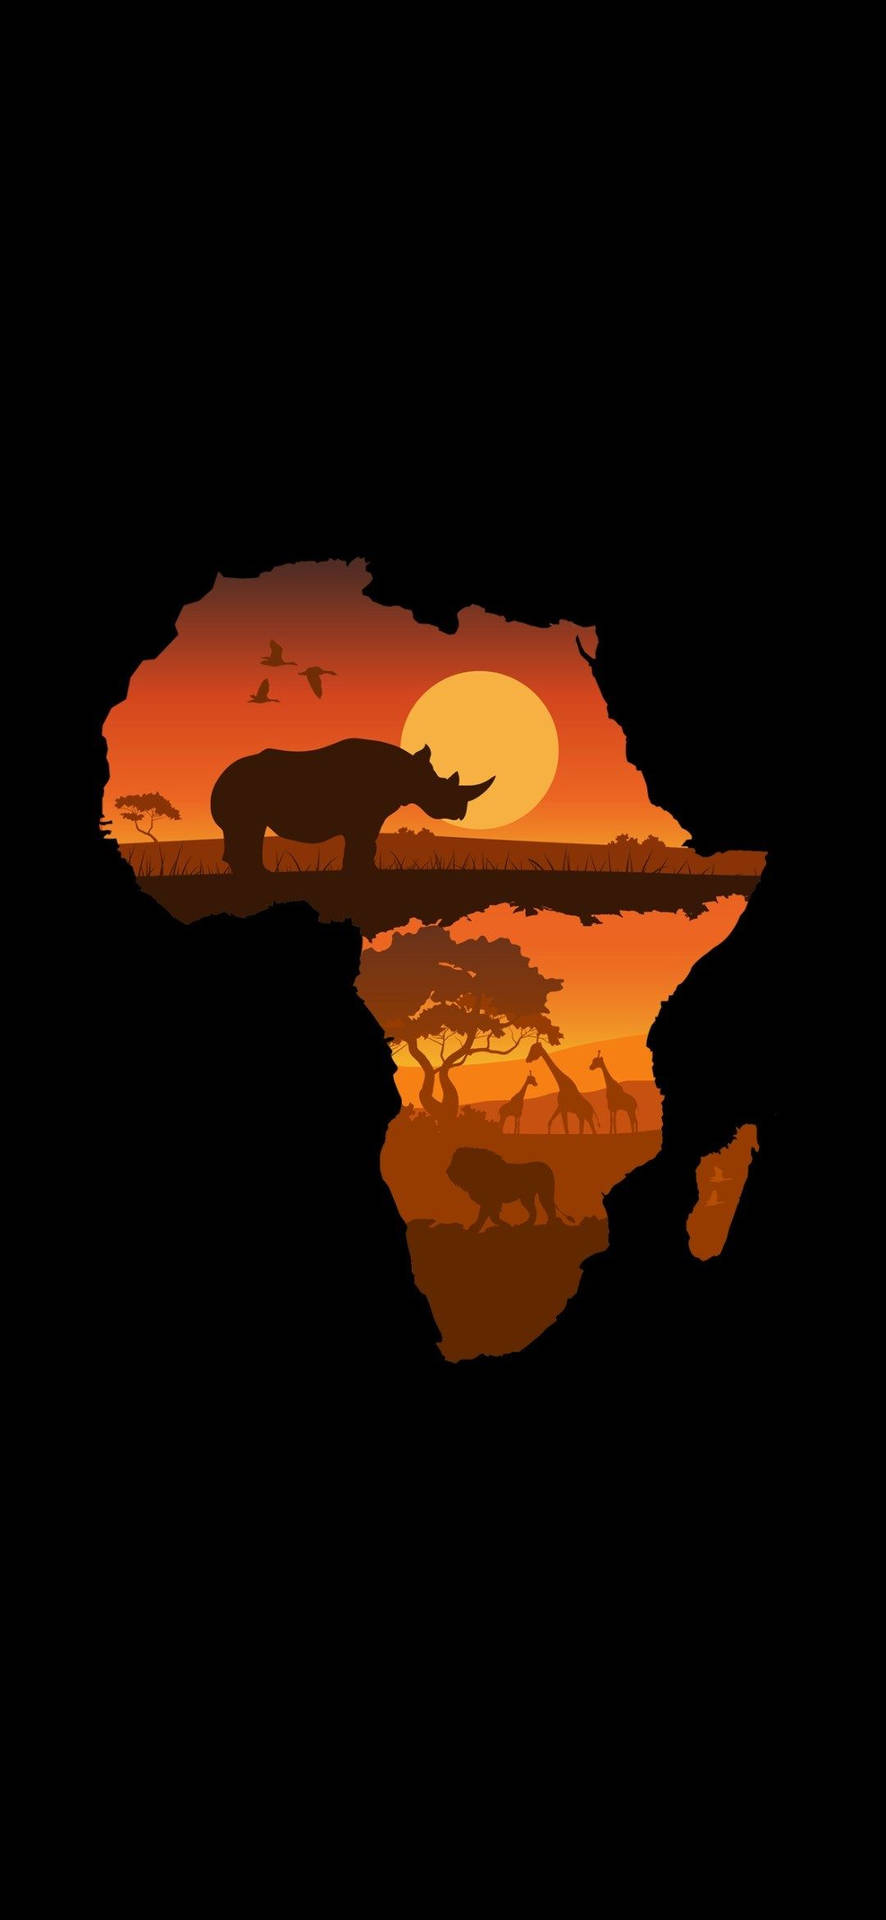 Animals And Continent Africa Iphone Wallpaper